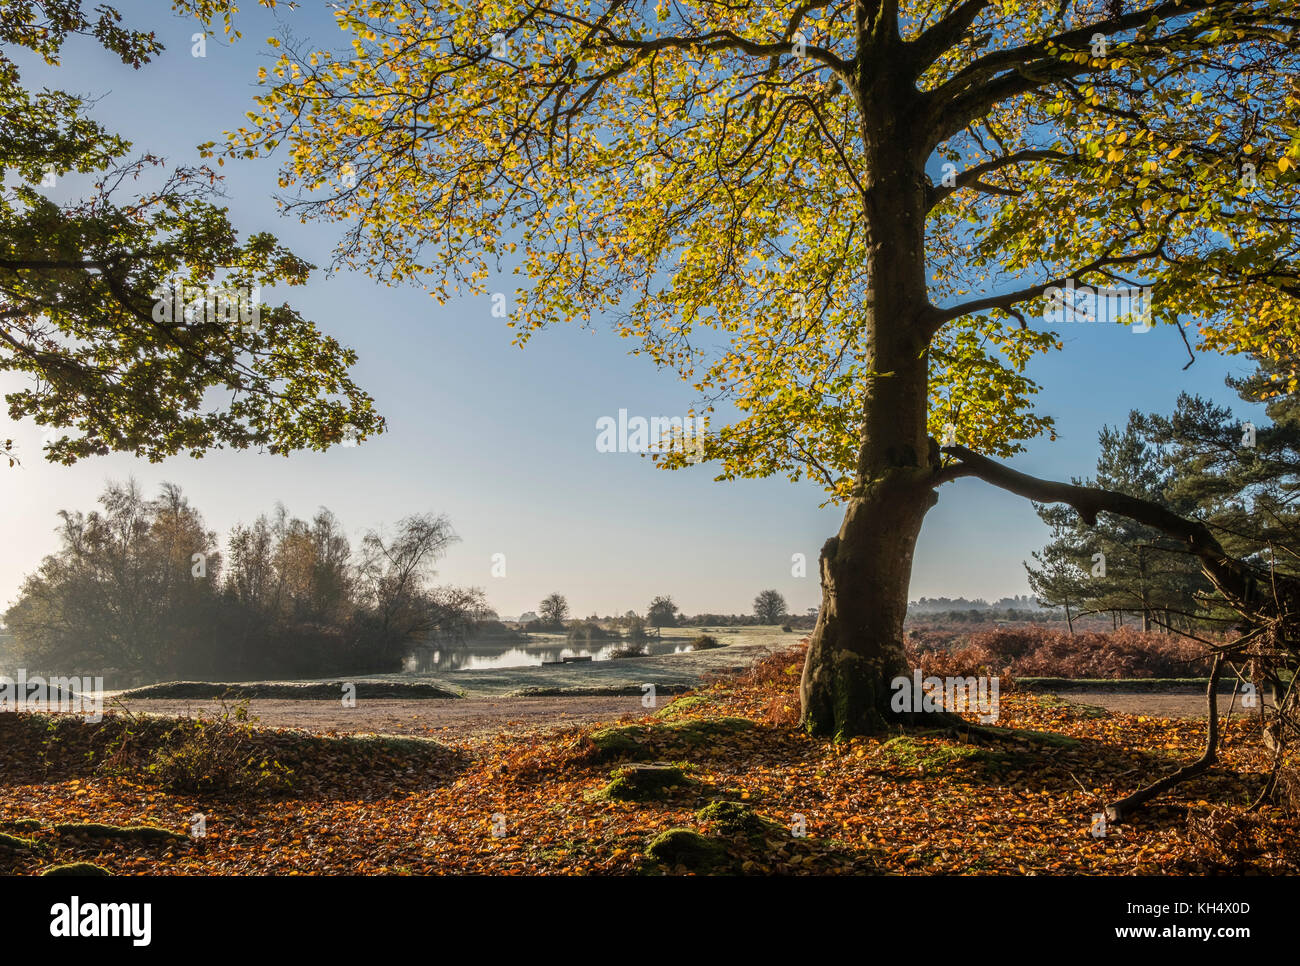 A view of Cadman's Pool in the New Forest through backlit Beech trees showing the autumn colours of the leaves and landscape beyond, Hampshire, UK Stock Photo